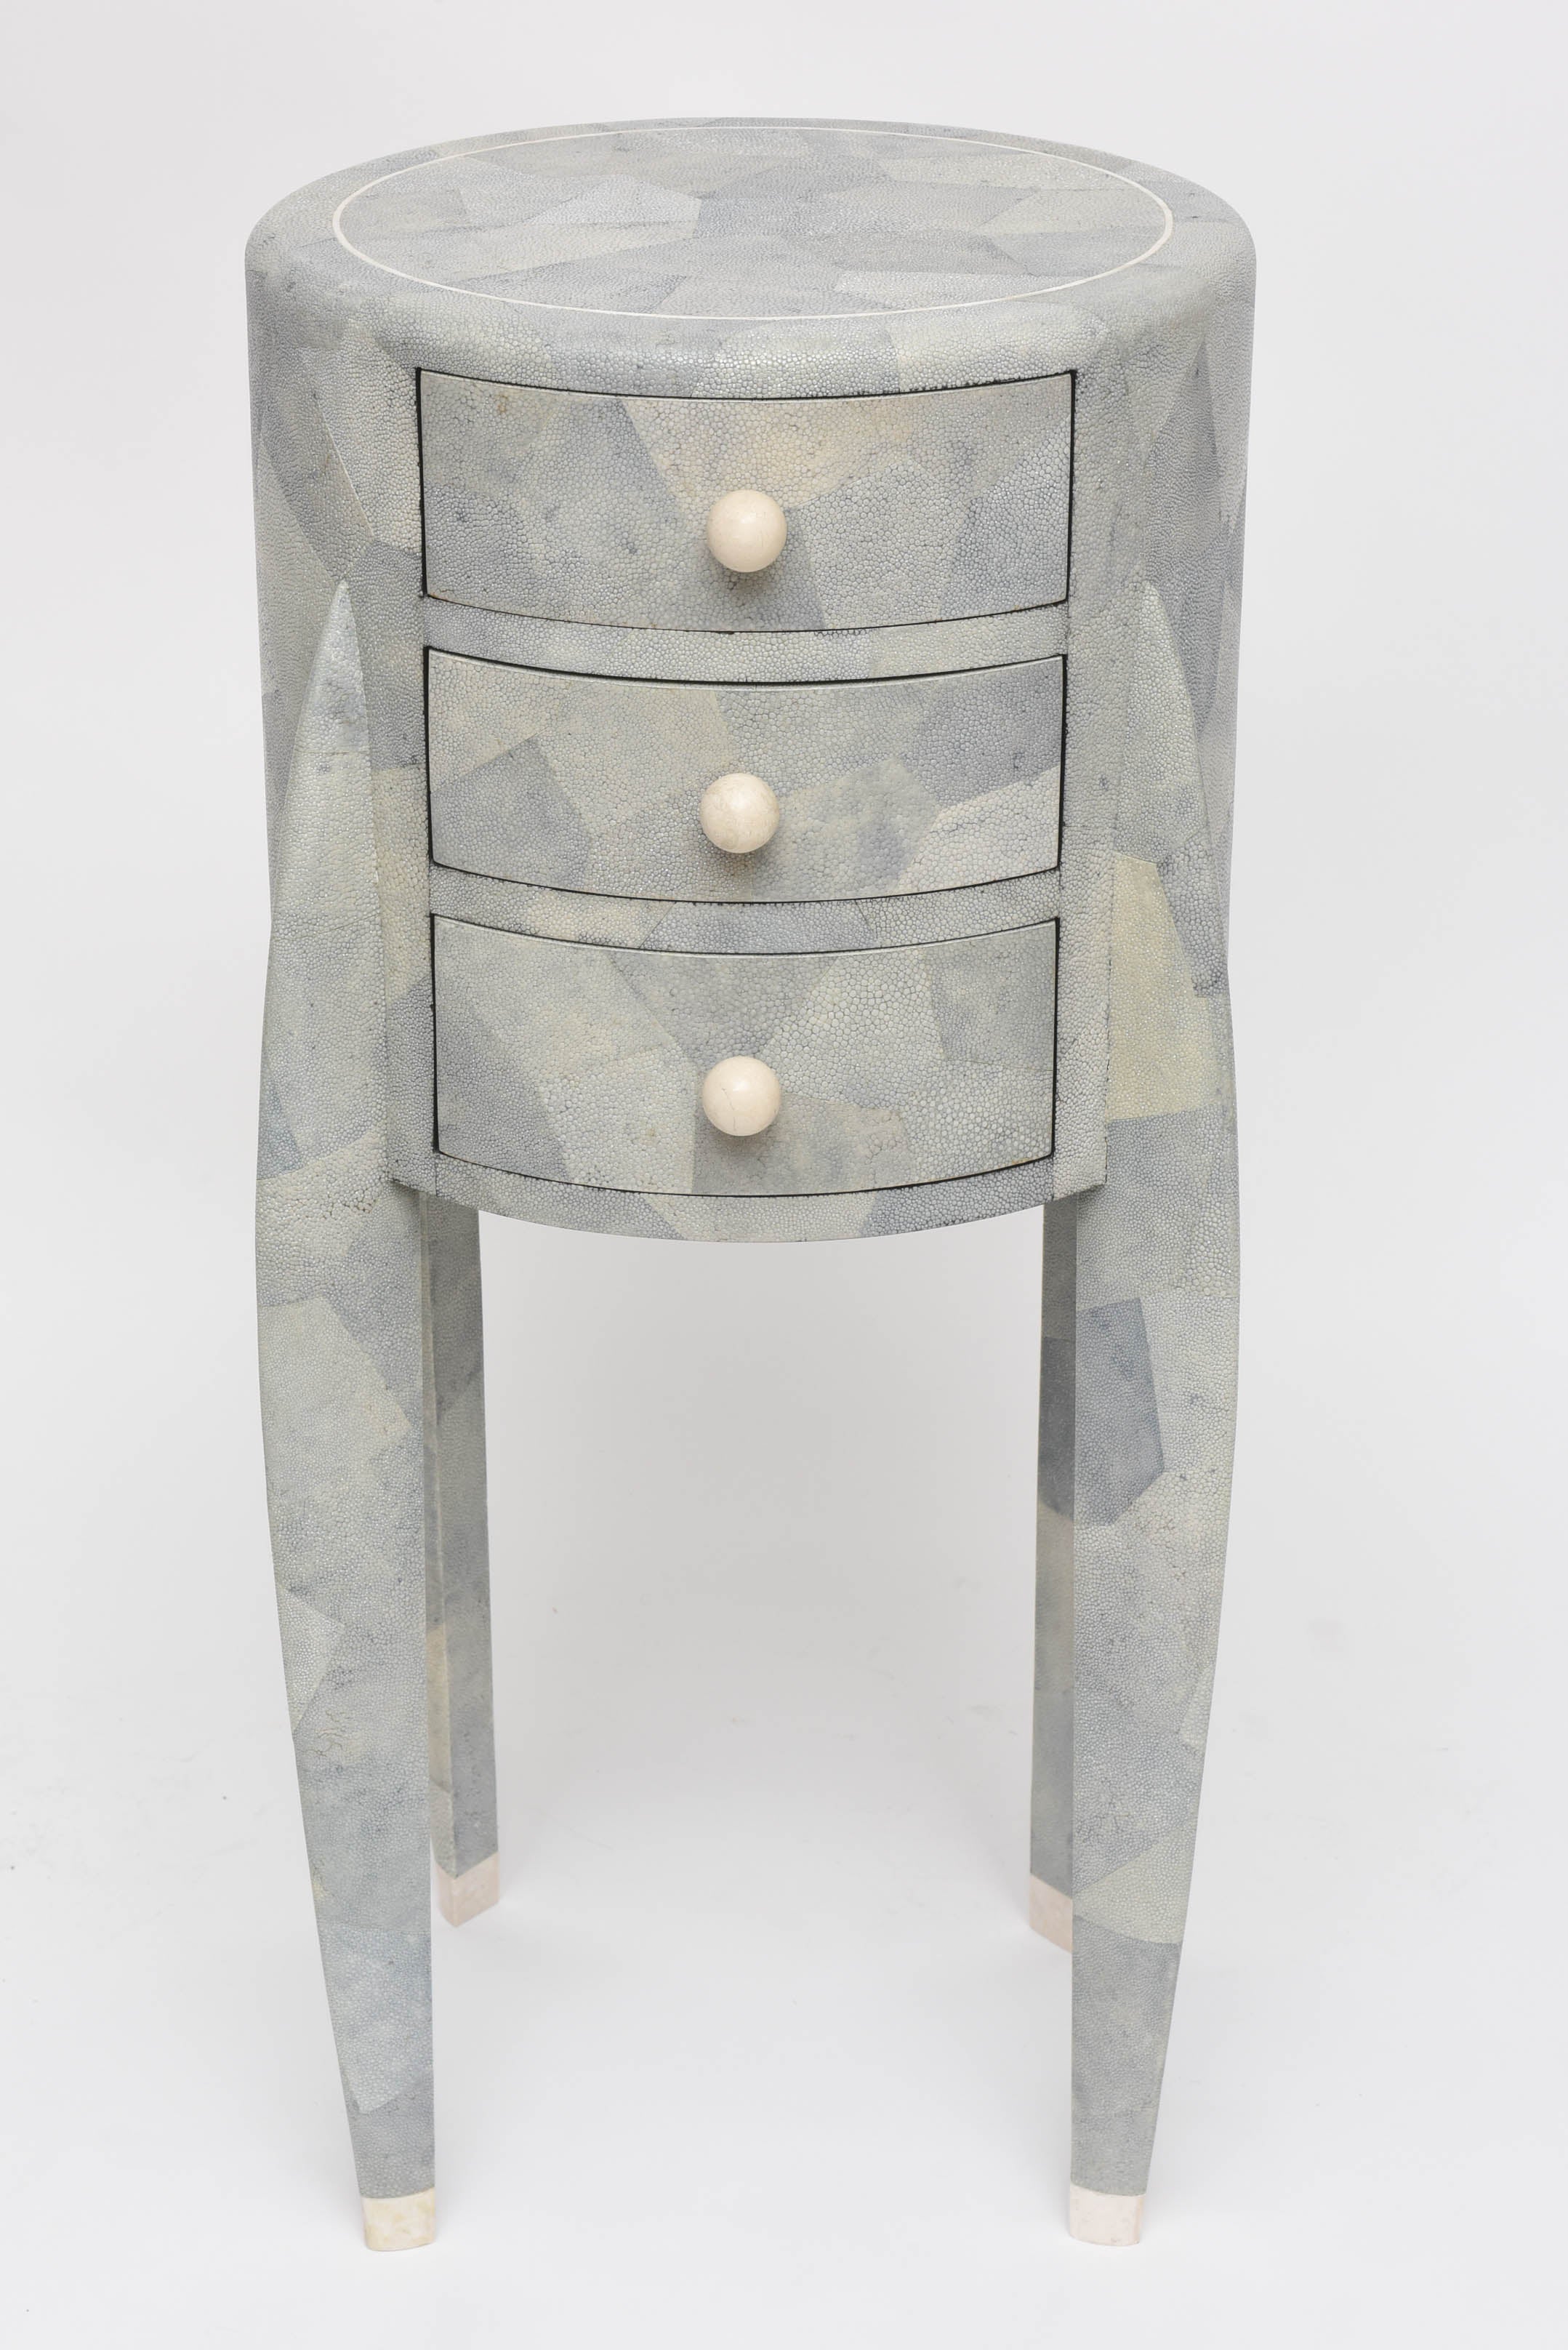 Shades of pale grey, and green all come through in this diminutive patchwork shagreen chest of drawers with creamy bone and stone accents, by Maitland-Smith.